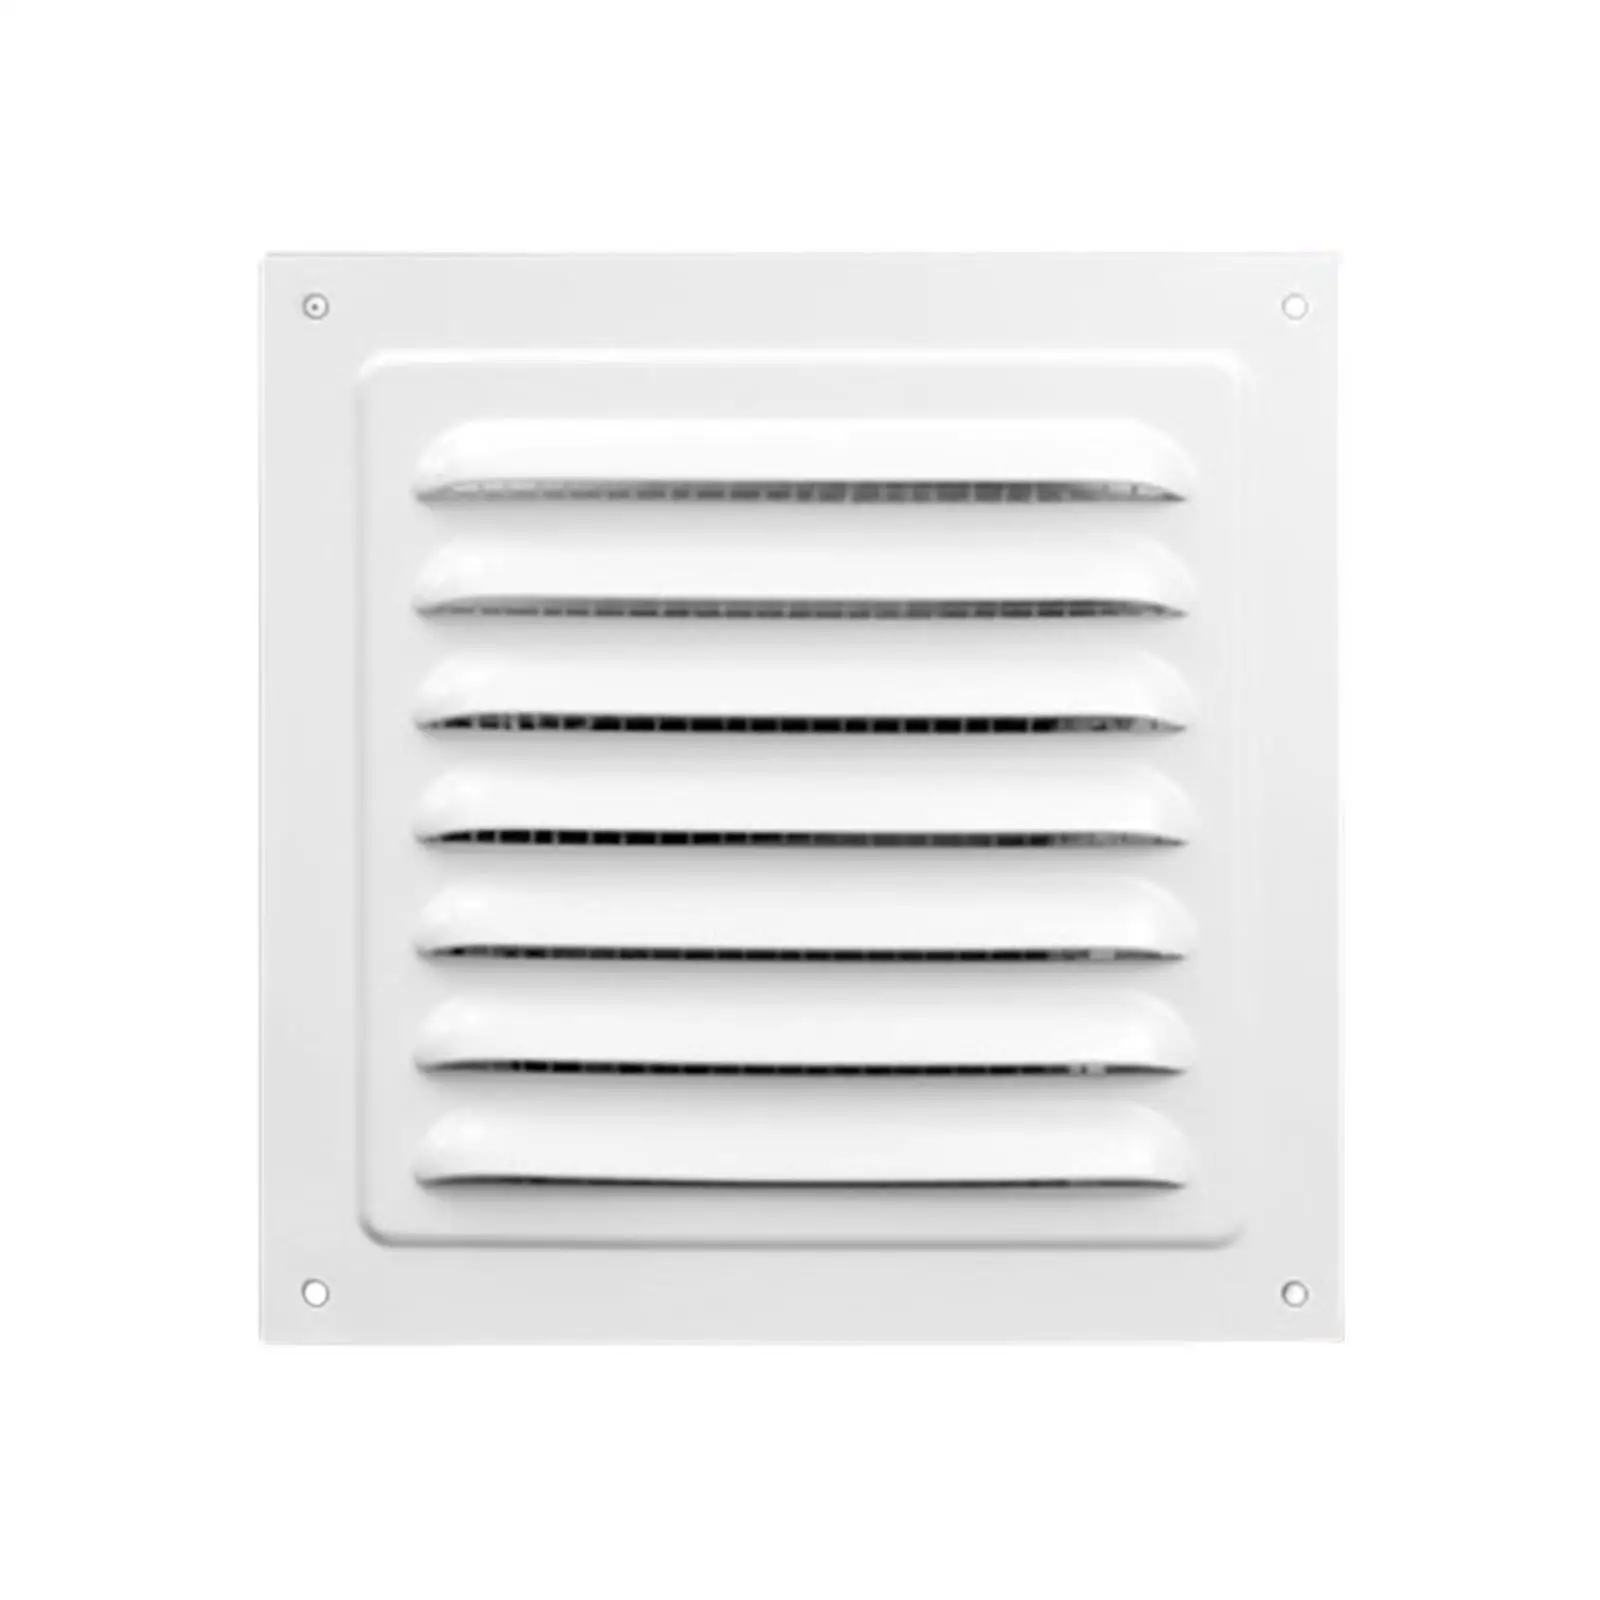 Air Vent Cover Ventilation Cover Return Air Grille Air Vent Grille for Office